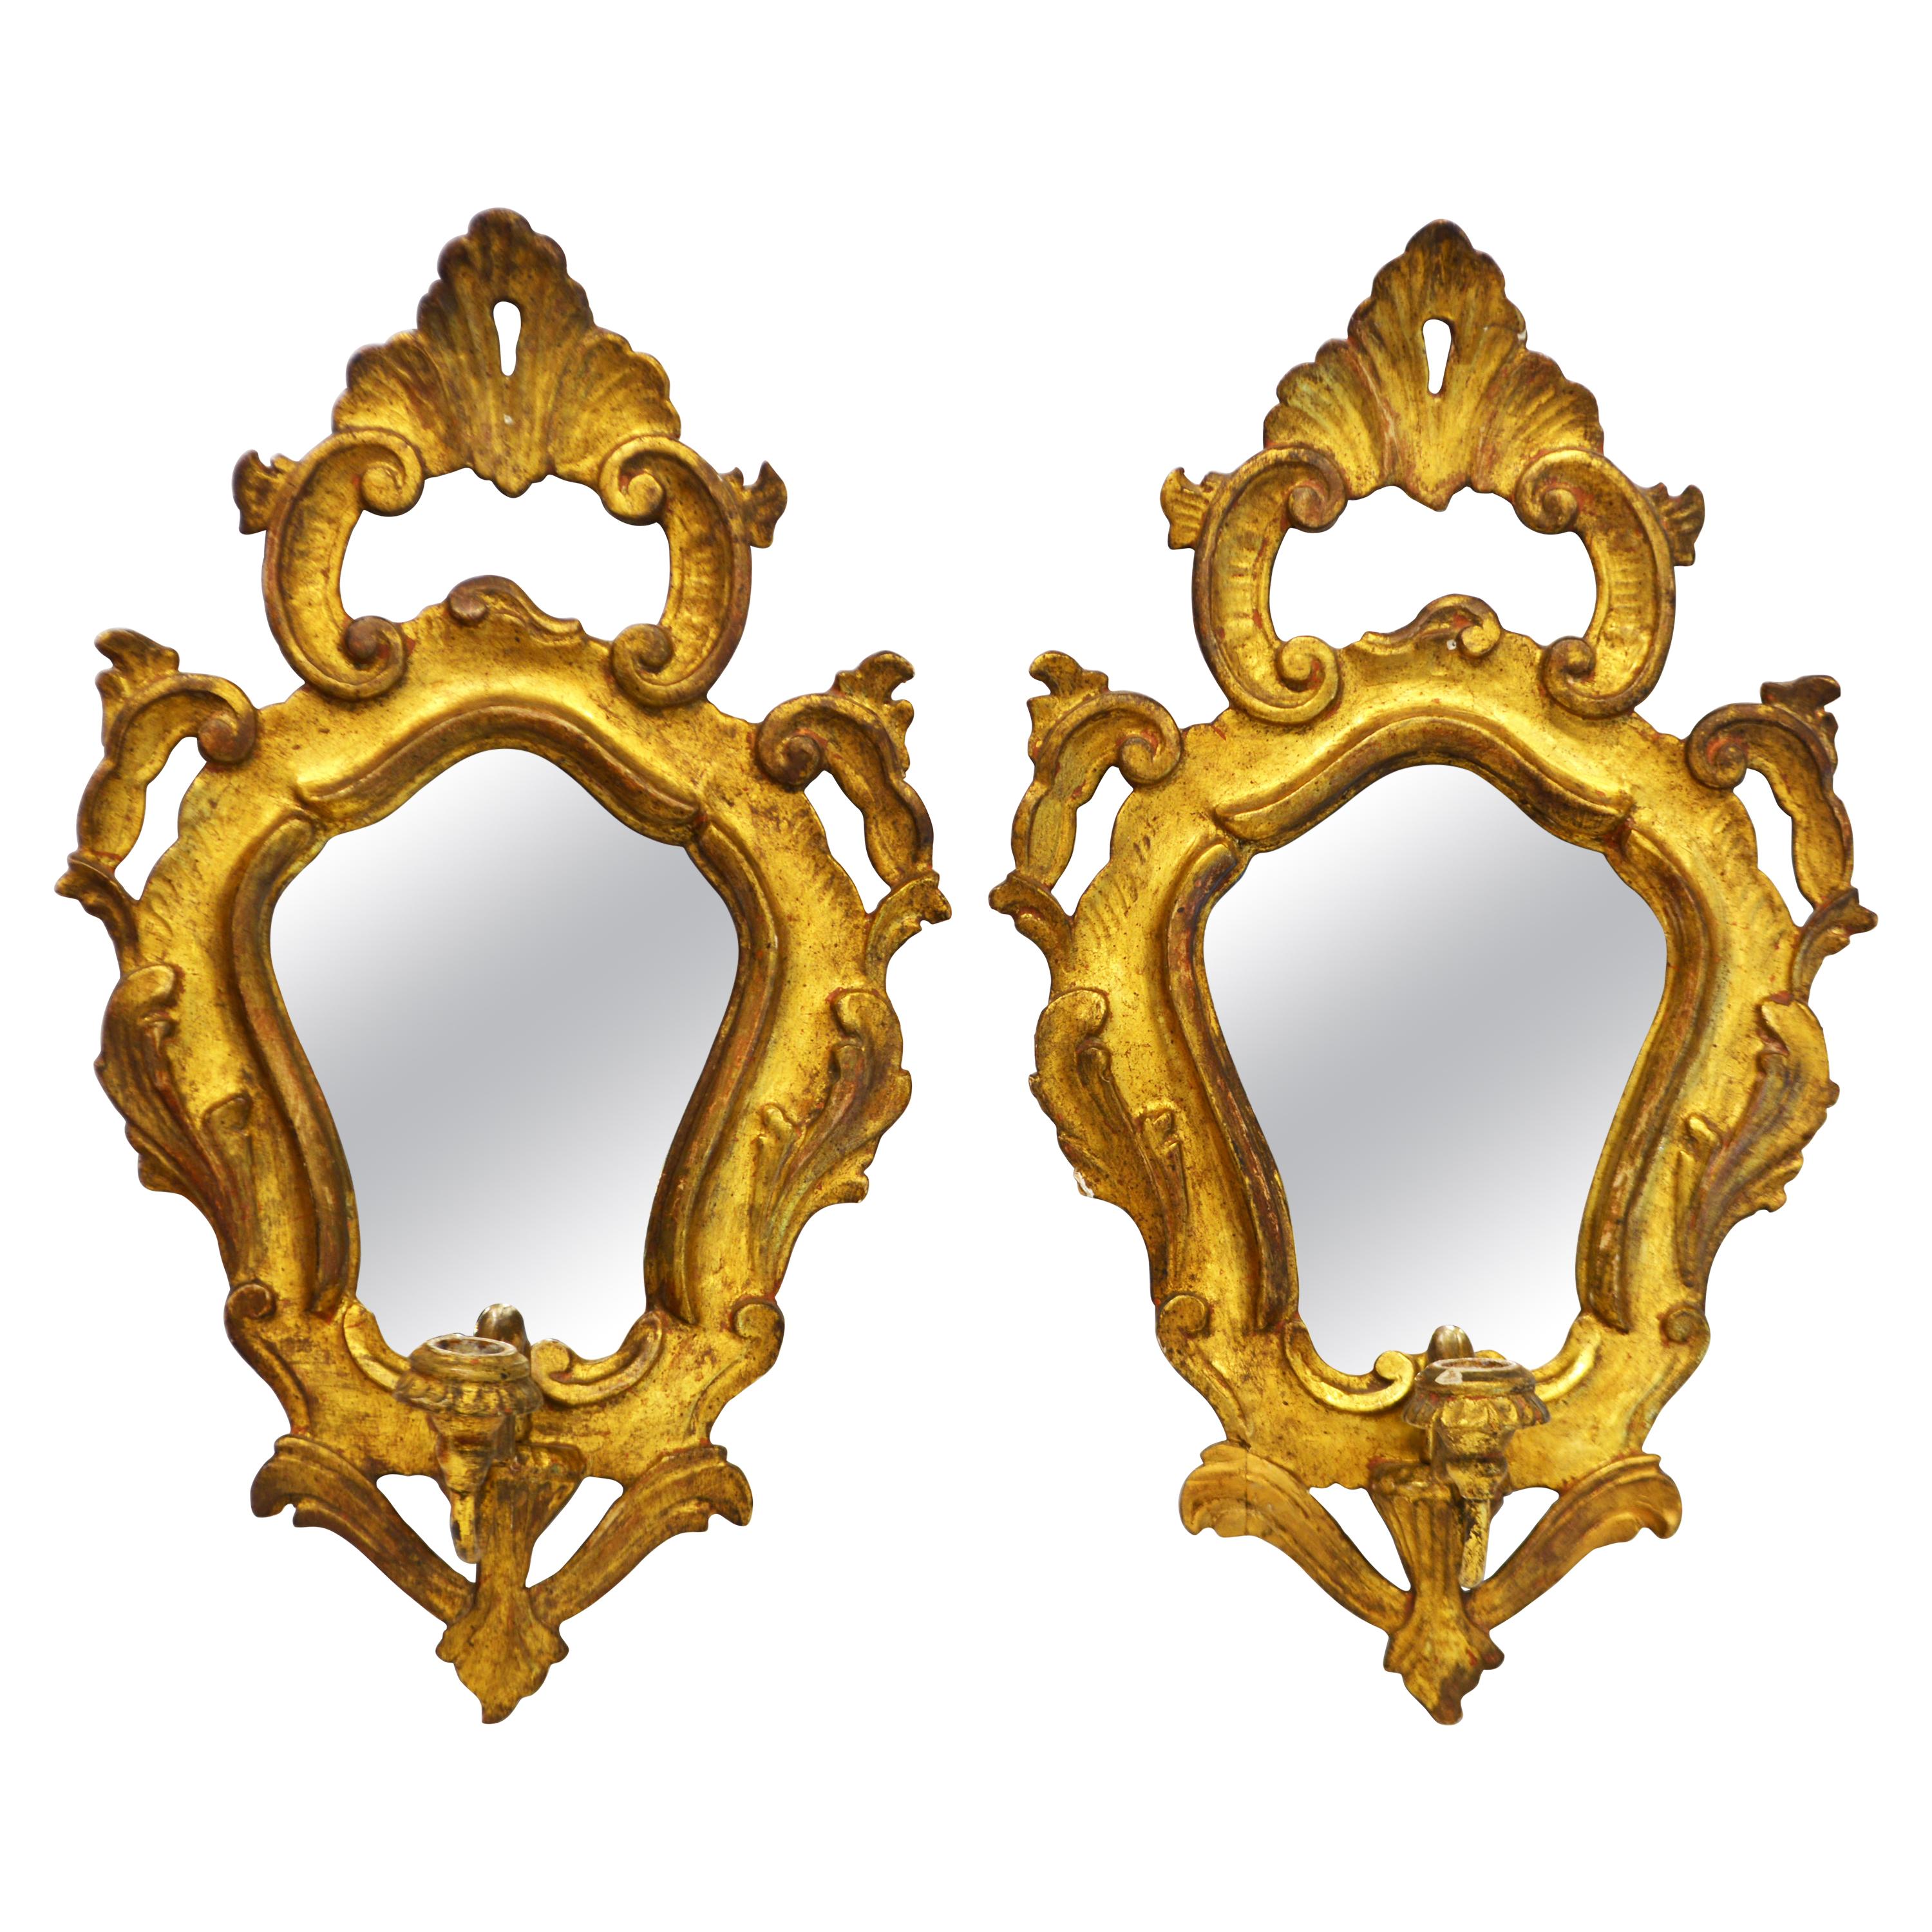 Pair of Italian Baroque Style Carved Giltwood Mirror Wall Sconces, Mid 20th C.